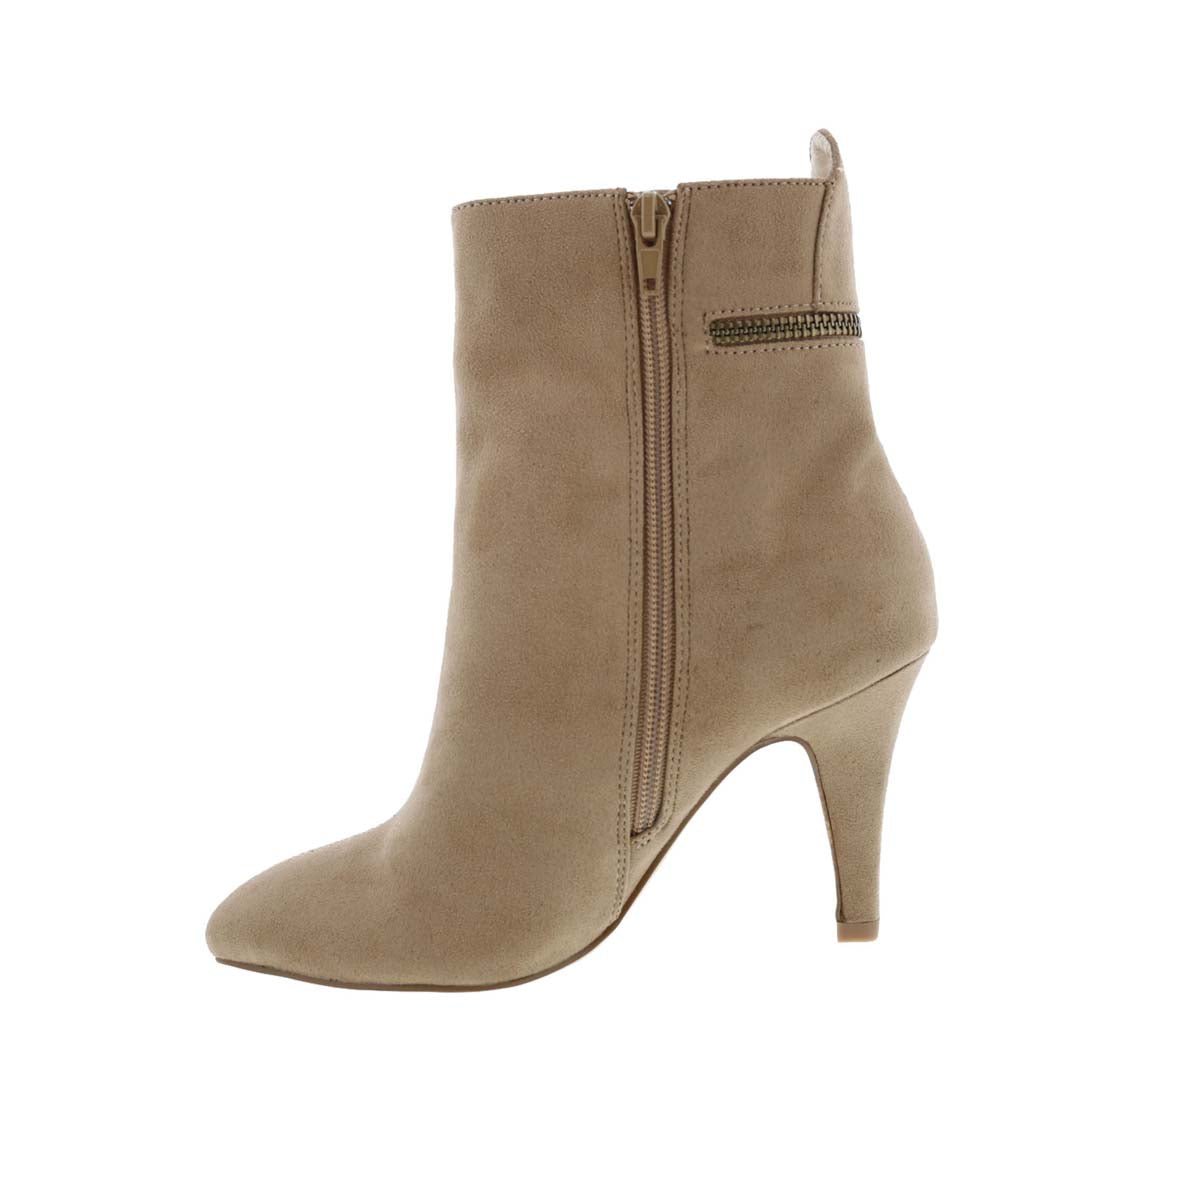 BELLINI CLAUDIA WOMEN BOOTS IN TAN MICROSUEDE - TLW Shoes